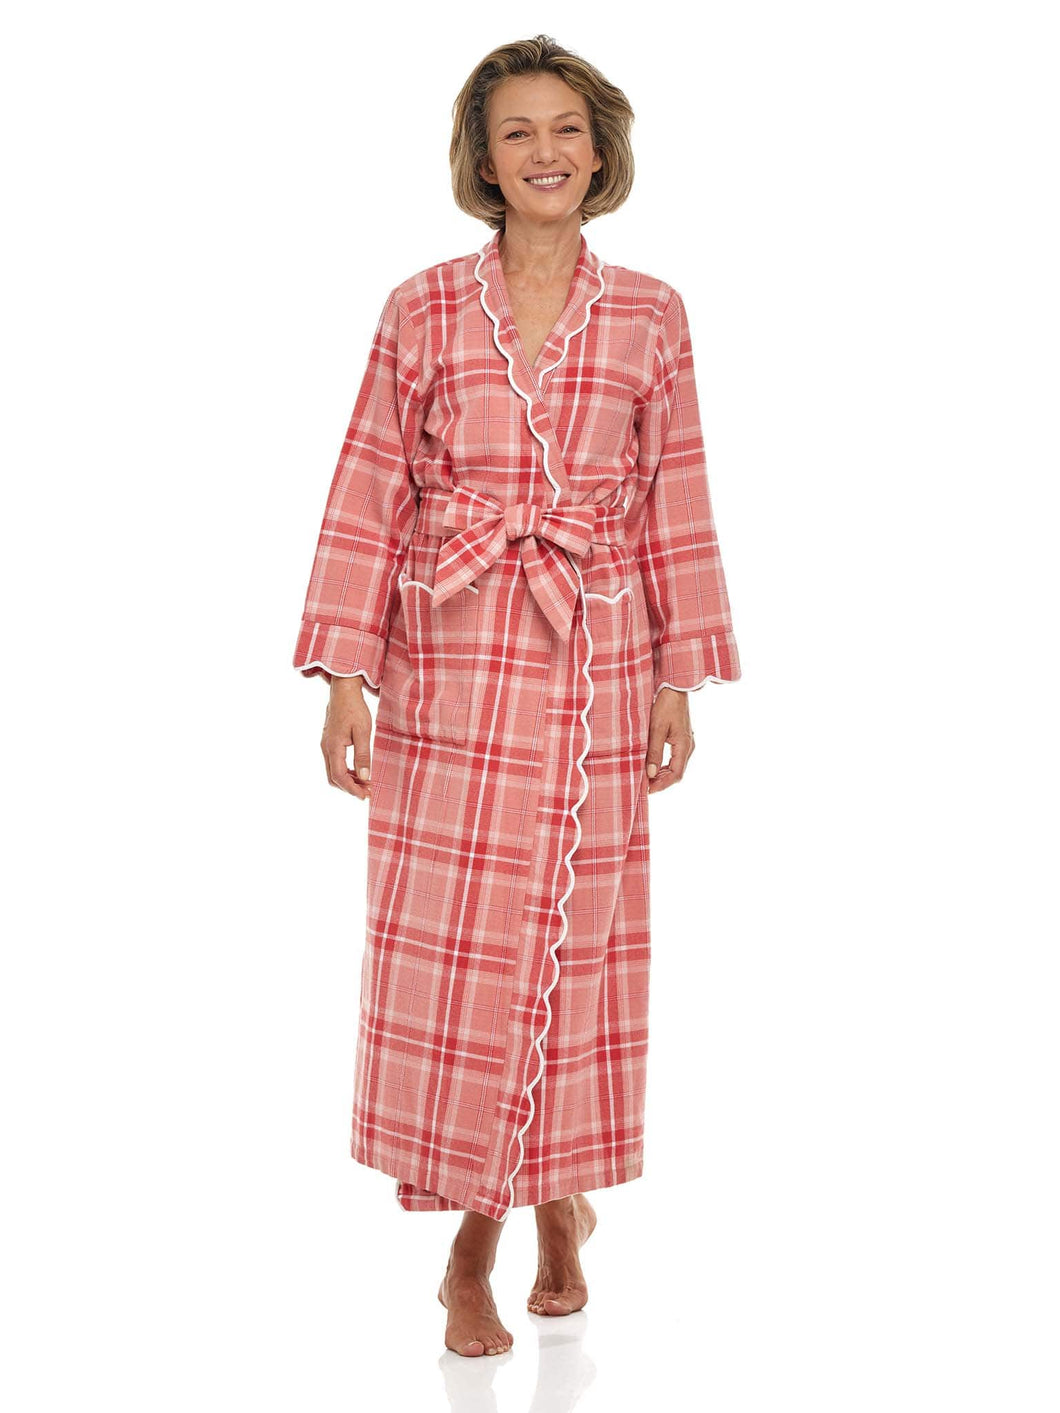 Flannel Robe - Navy and Rockabilly Red Check